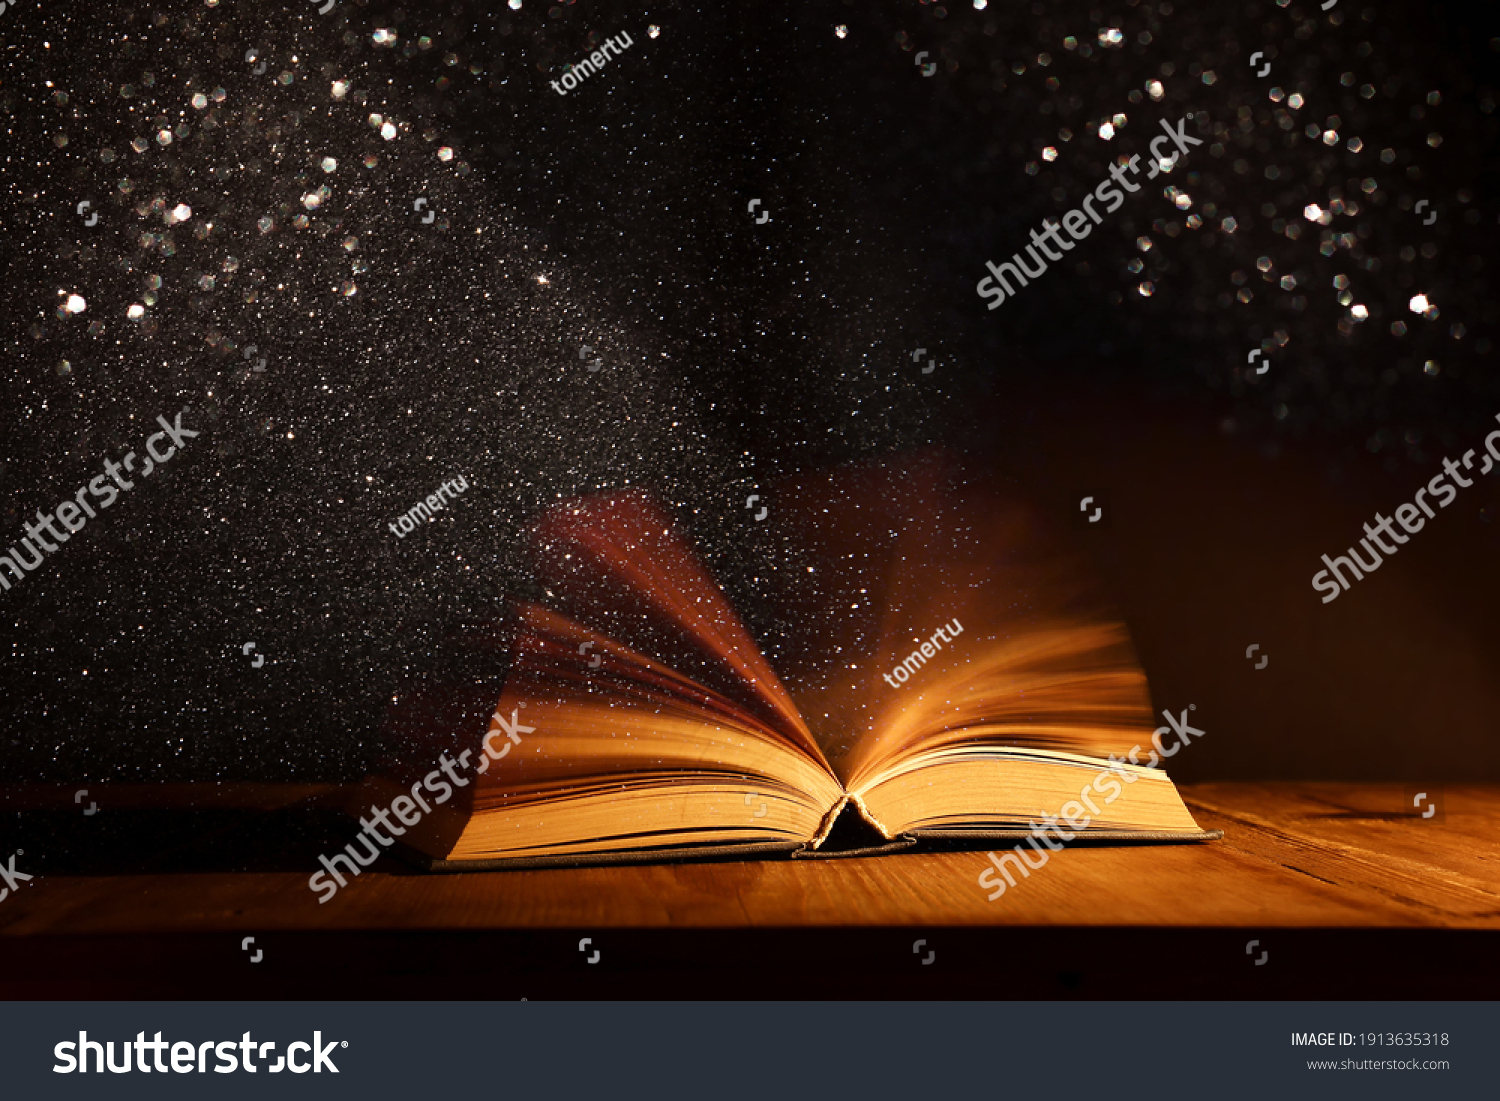 Magical image of open antique book over wooden table with glitter overlay #1913635318